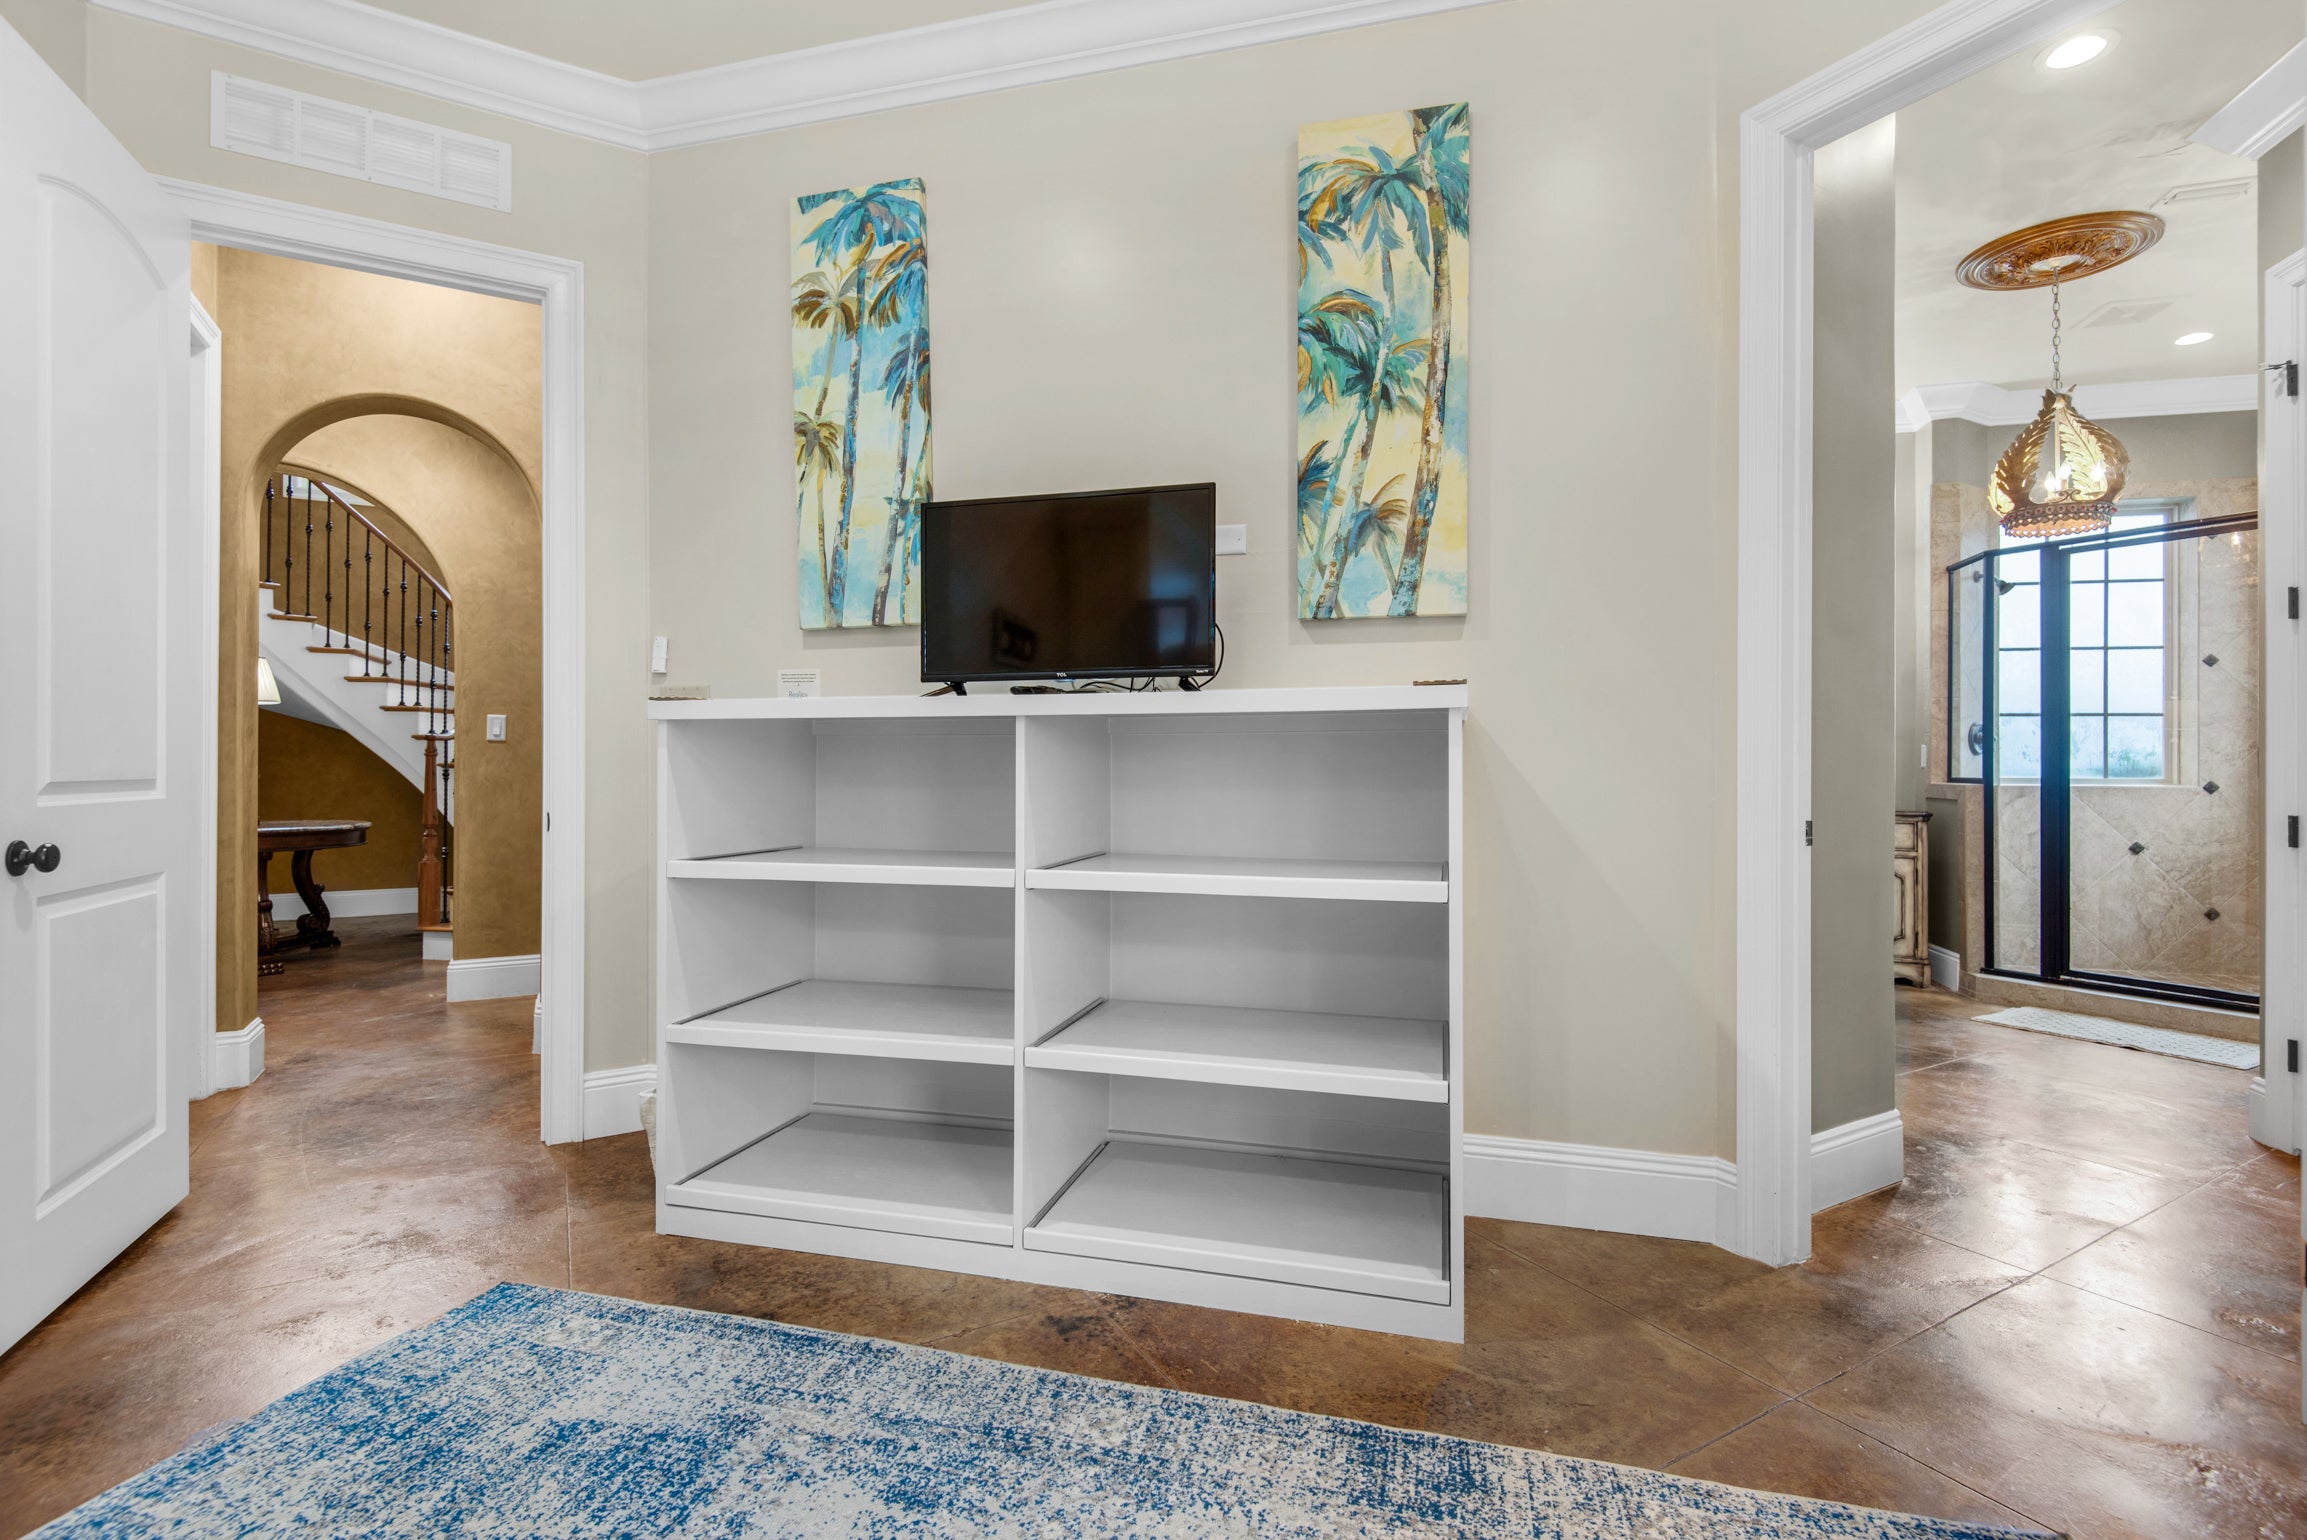 Custom Bunk room shelving for suitcases with smart tv